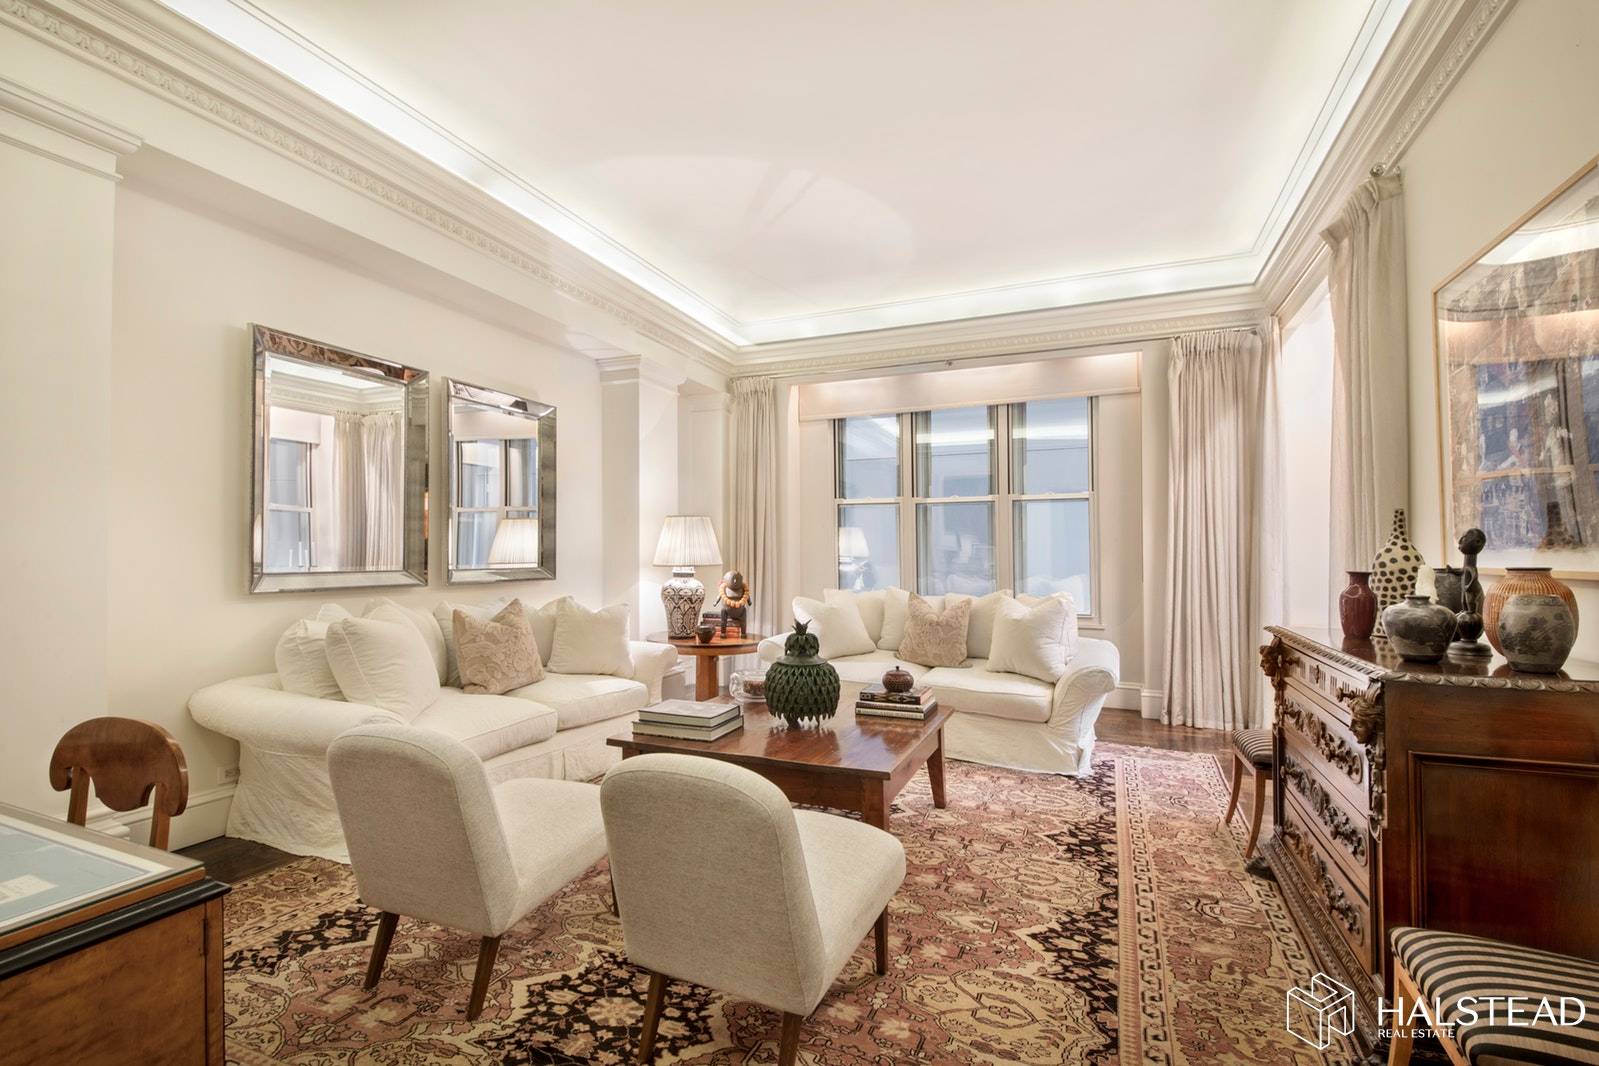 Find sophistication and Prewar charm in this luxurious 1 BR, 2 BA home.